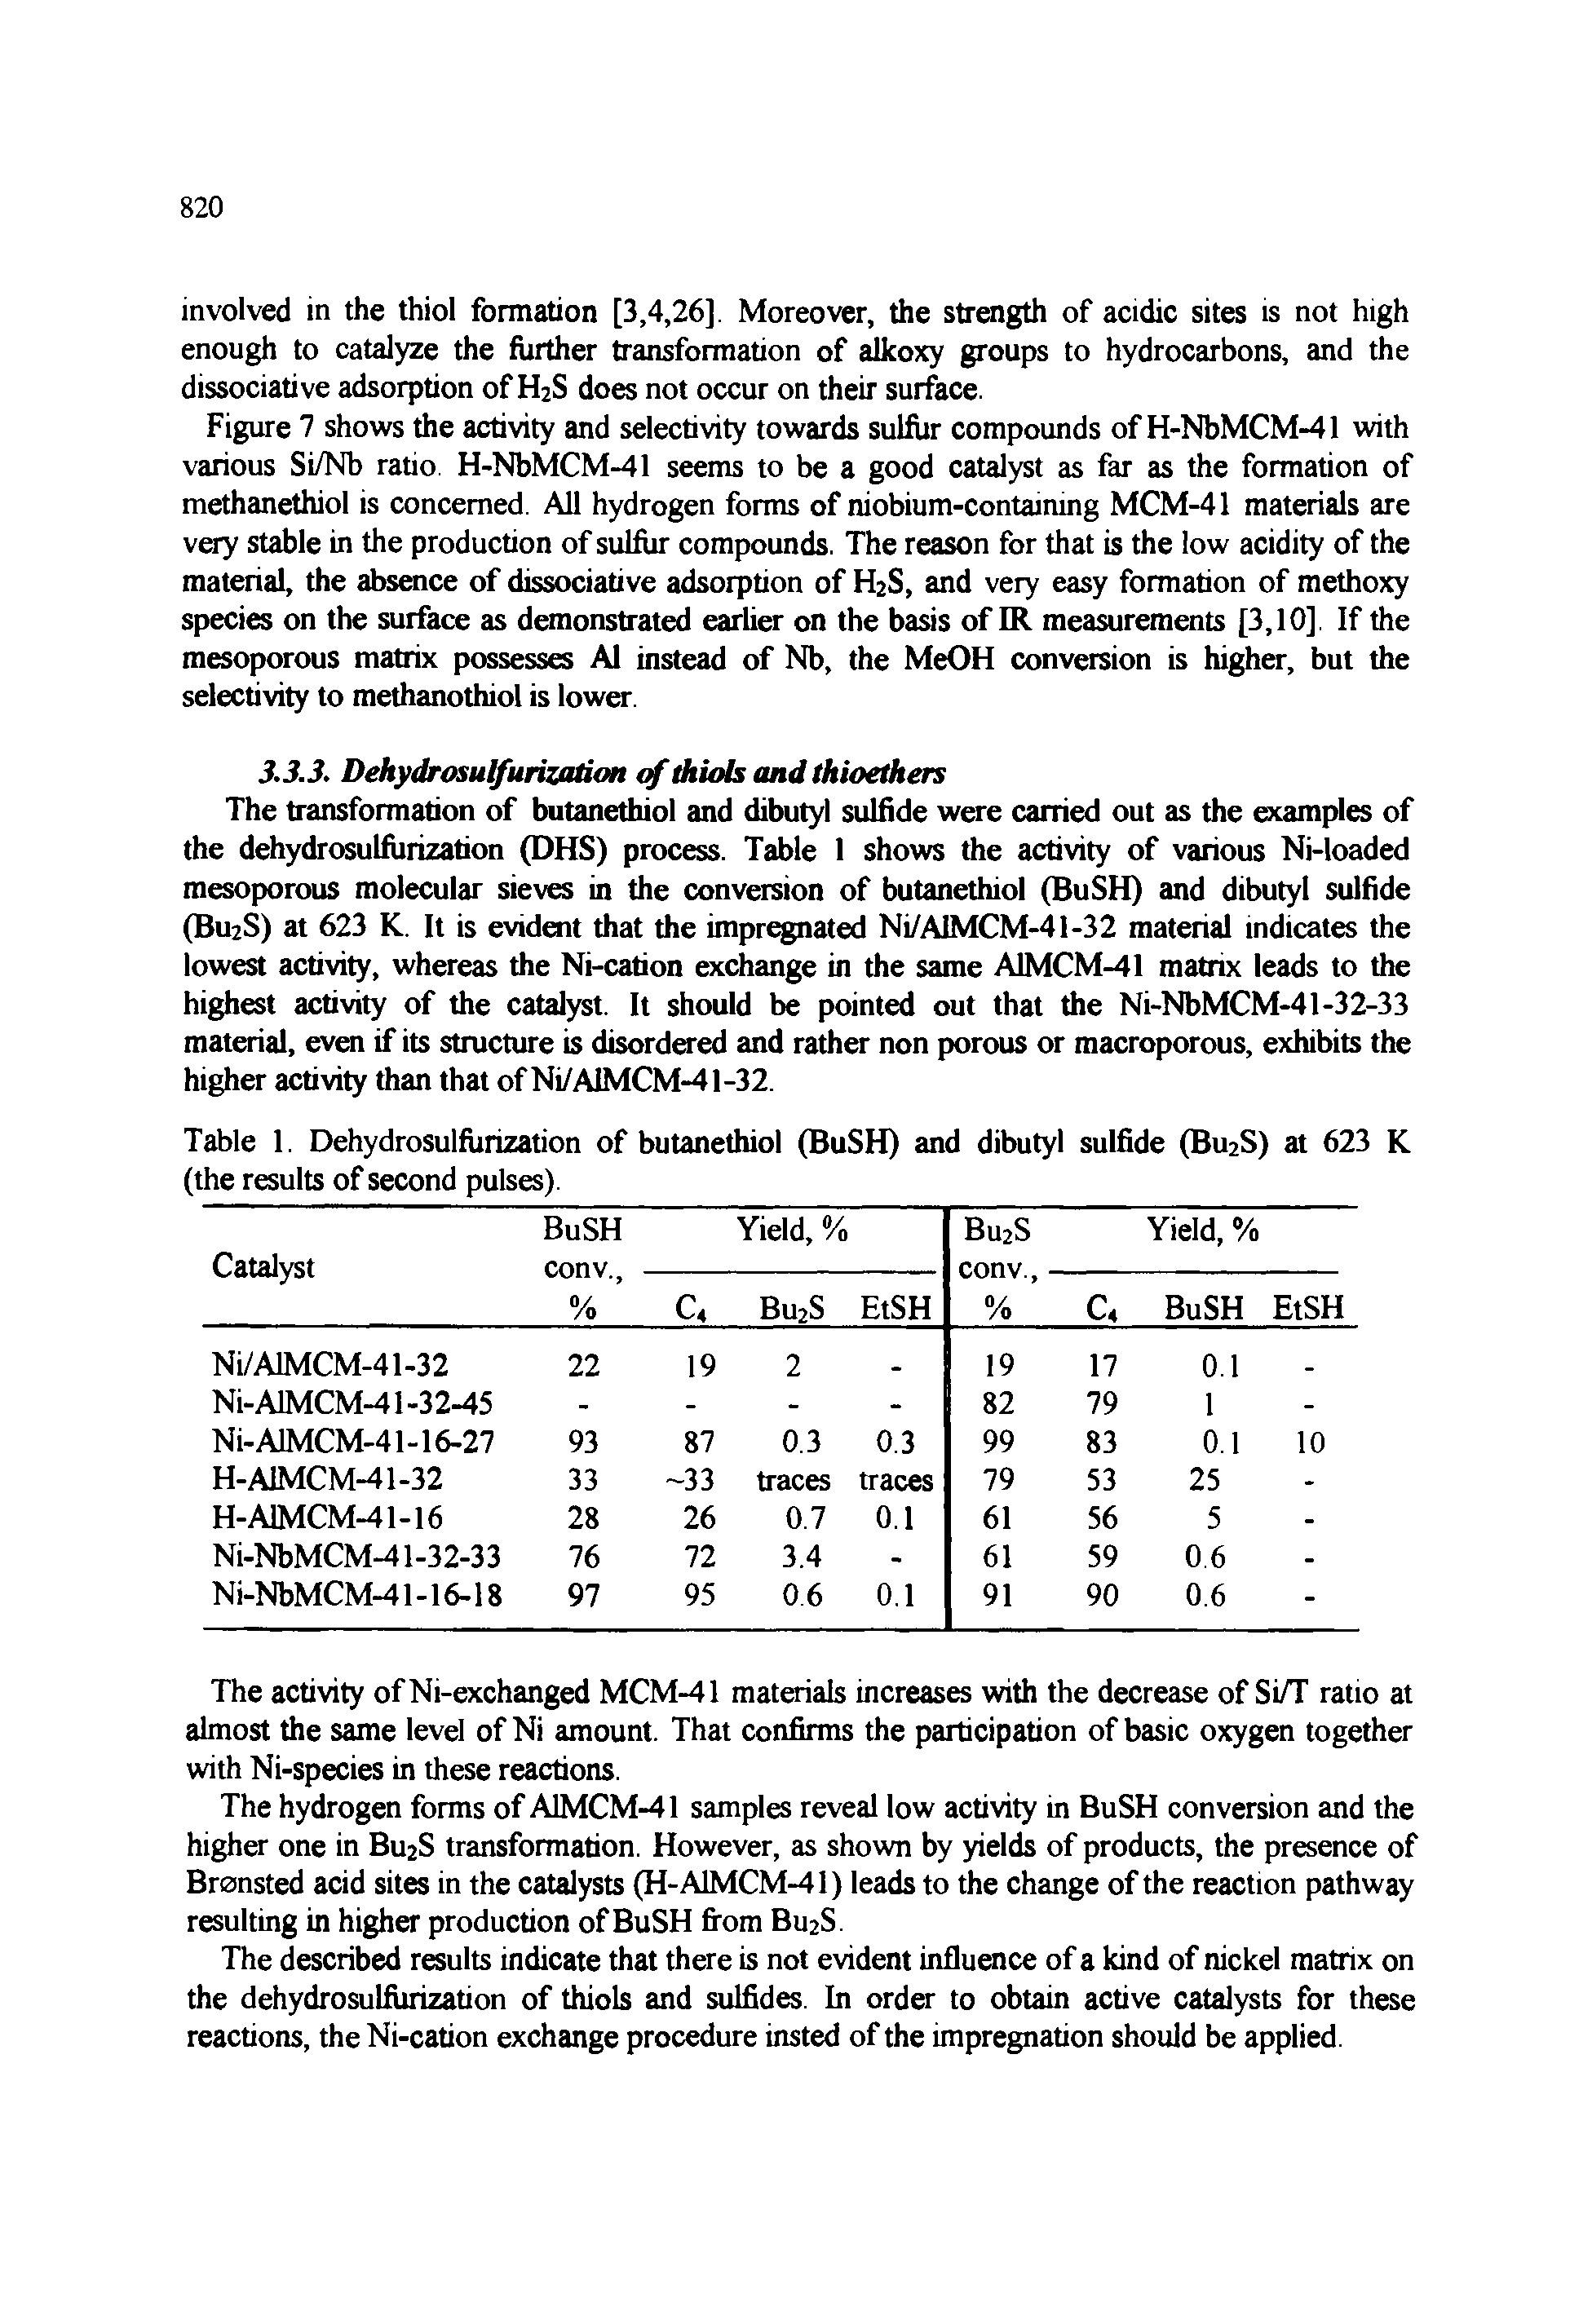 Table 1. Dehydrosulfurization of butanethiol (BuSH) and dibutyl sulfide (Bu2S) at 623 K (the results of second pulses).